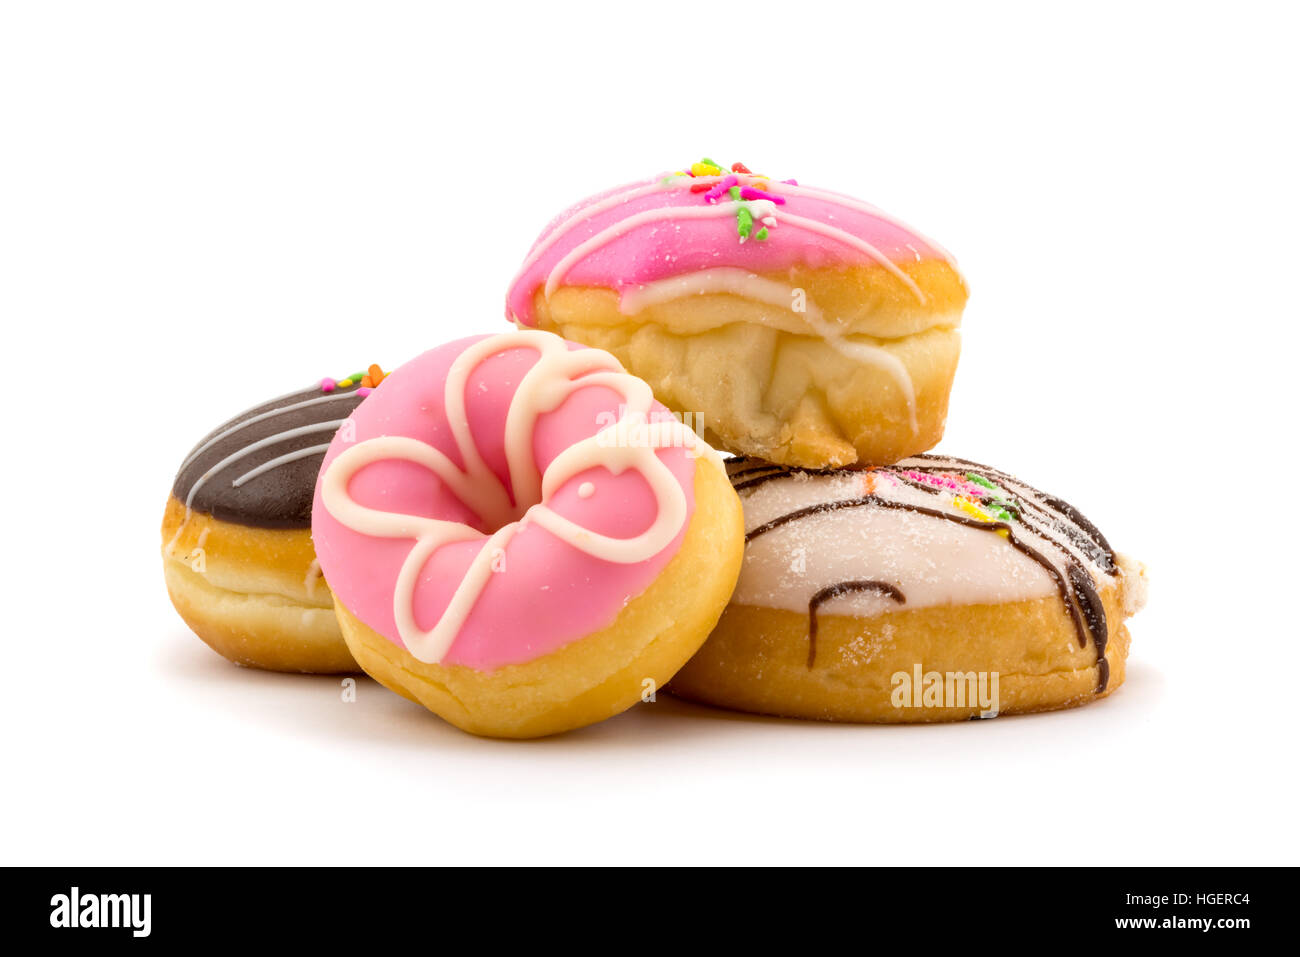 Pile of colorful tasty doughnuts on white background Stock Photo